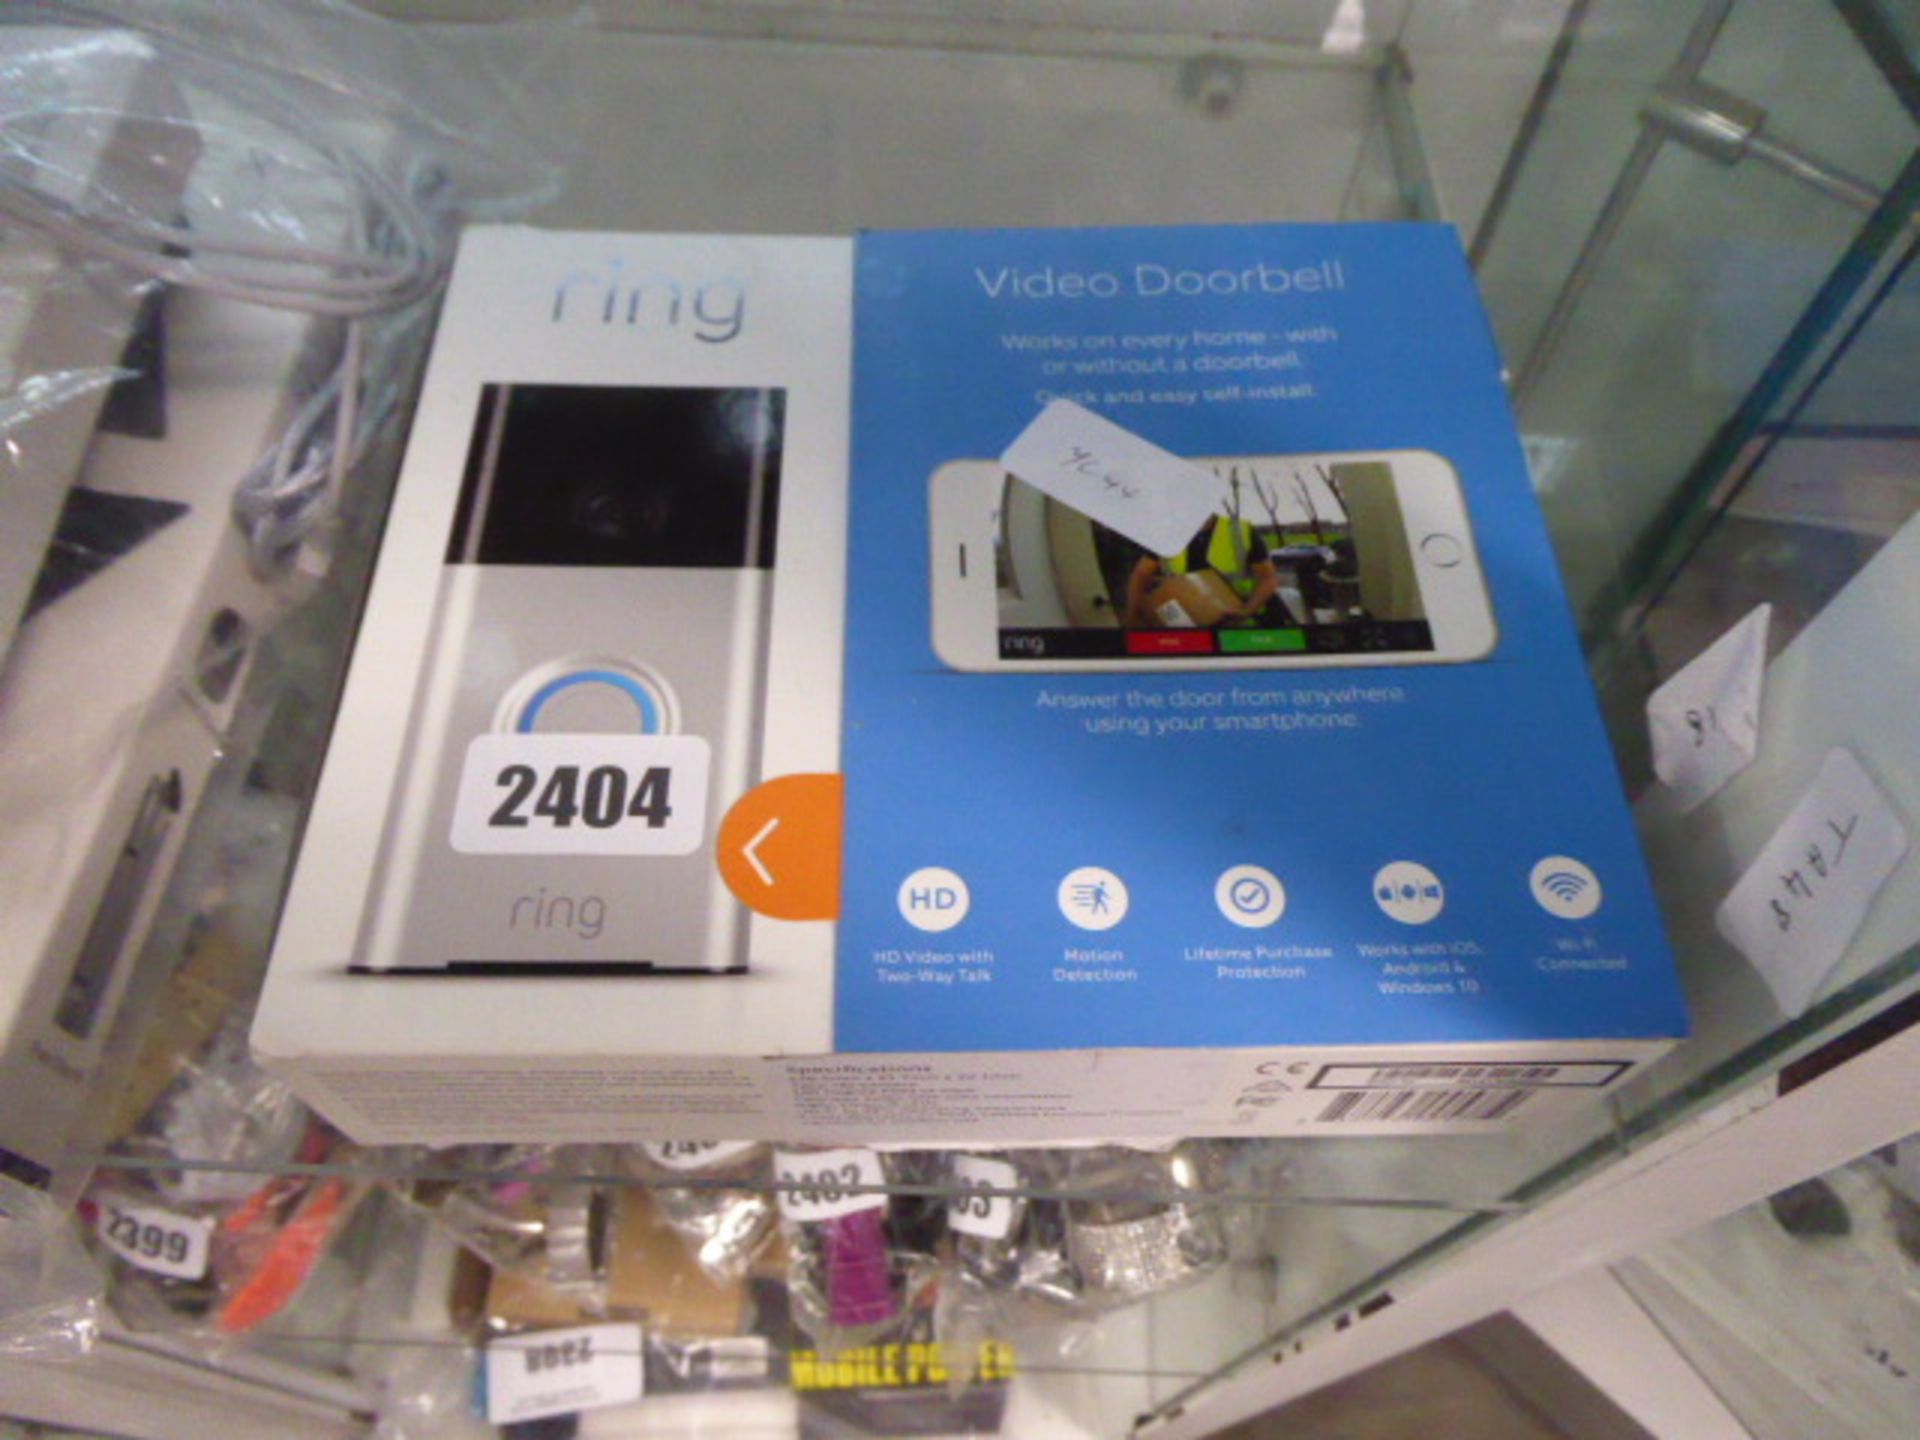 Ring video doorbell system as found in box